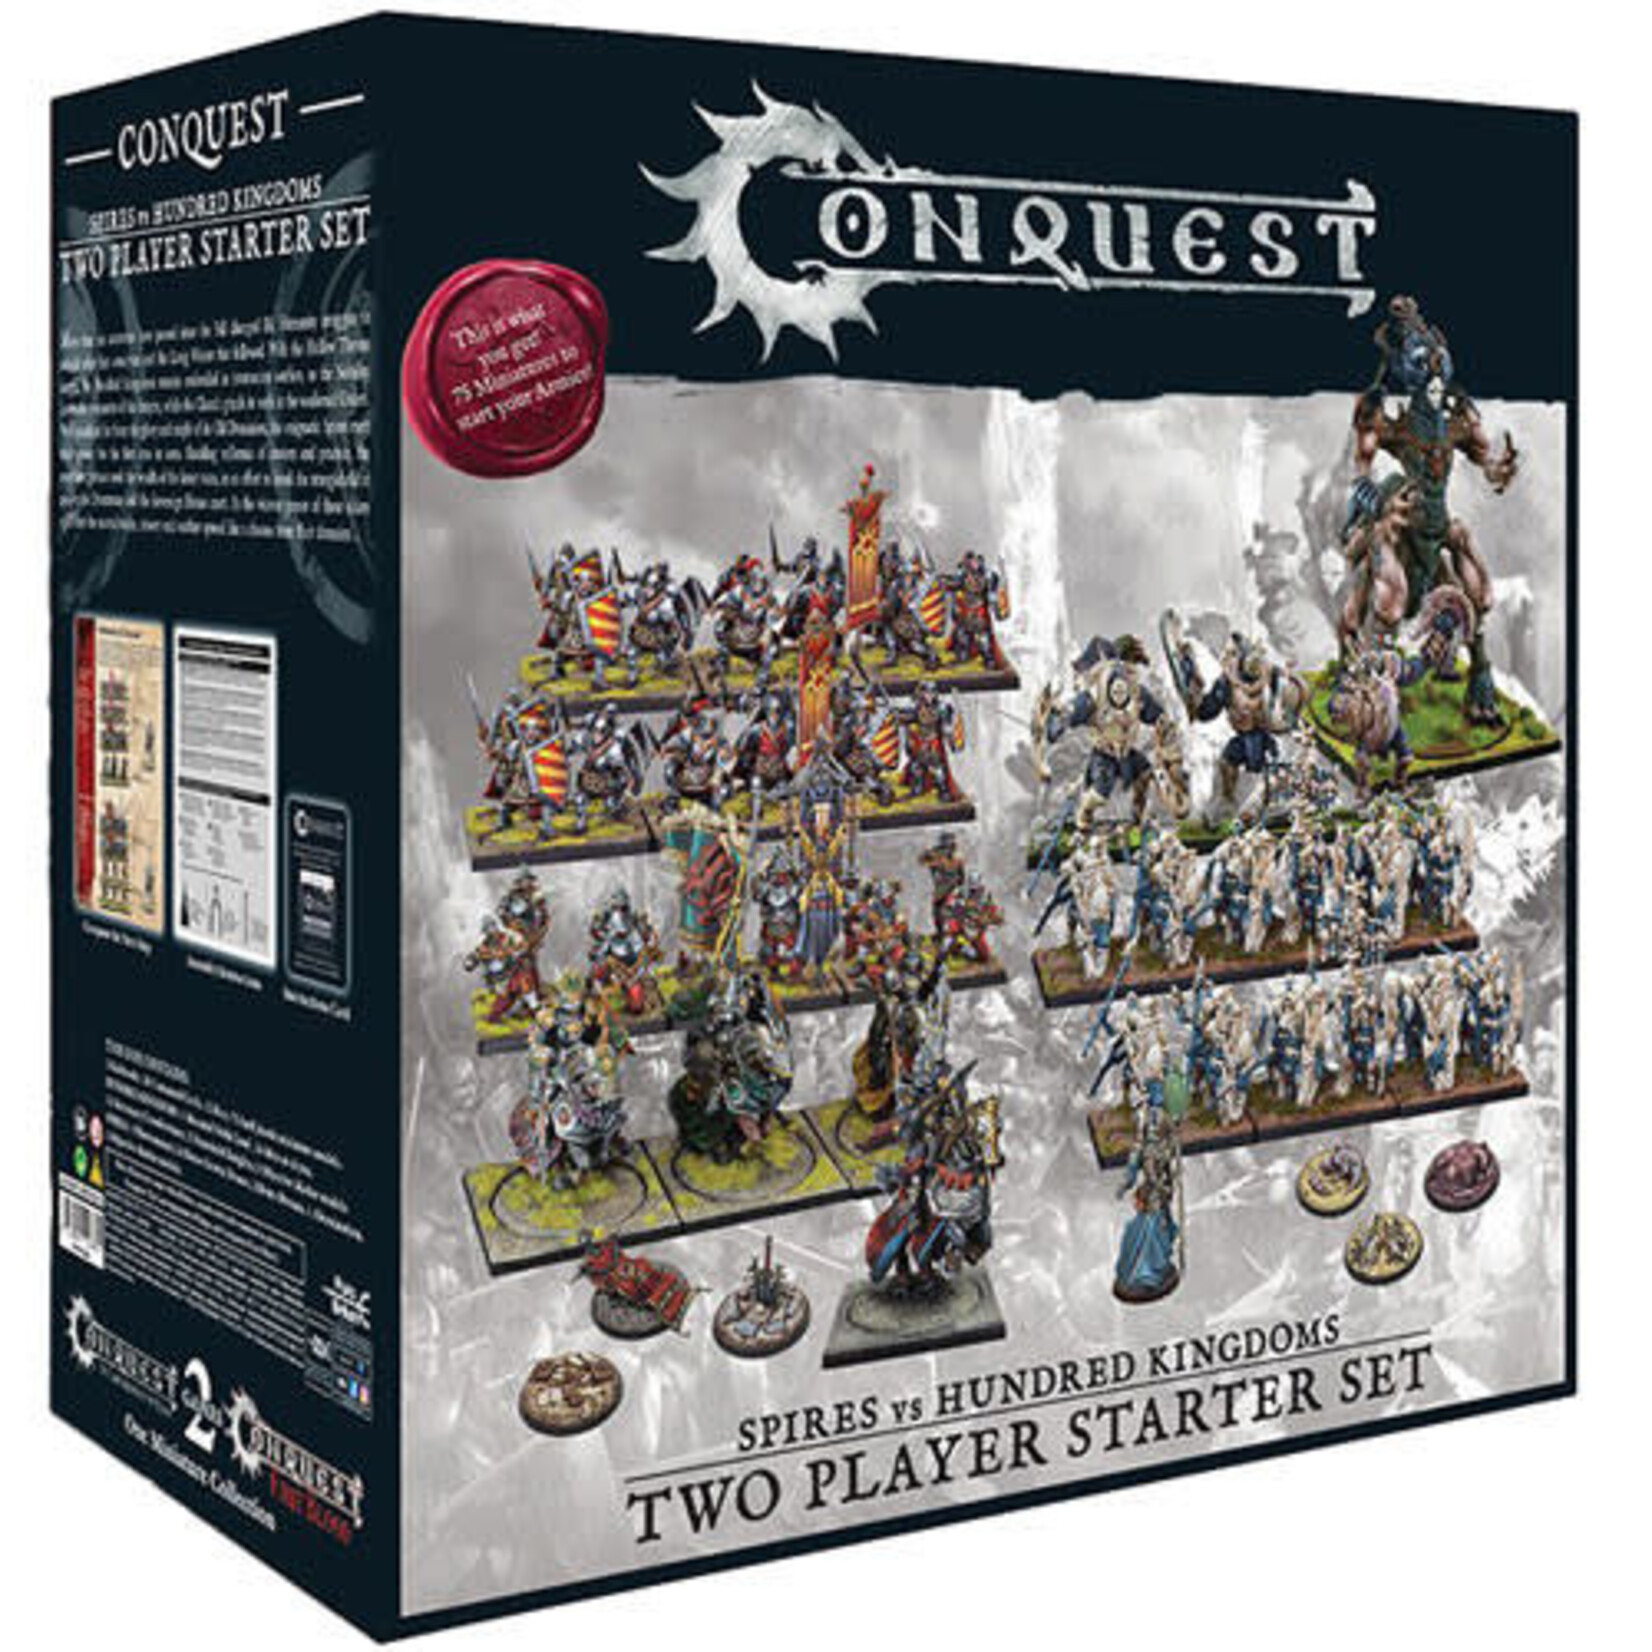 Conquest Conquest: Two player starter set - Spires & hundred kingdoms